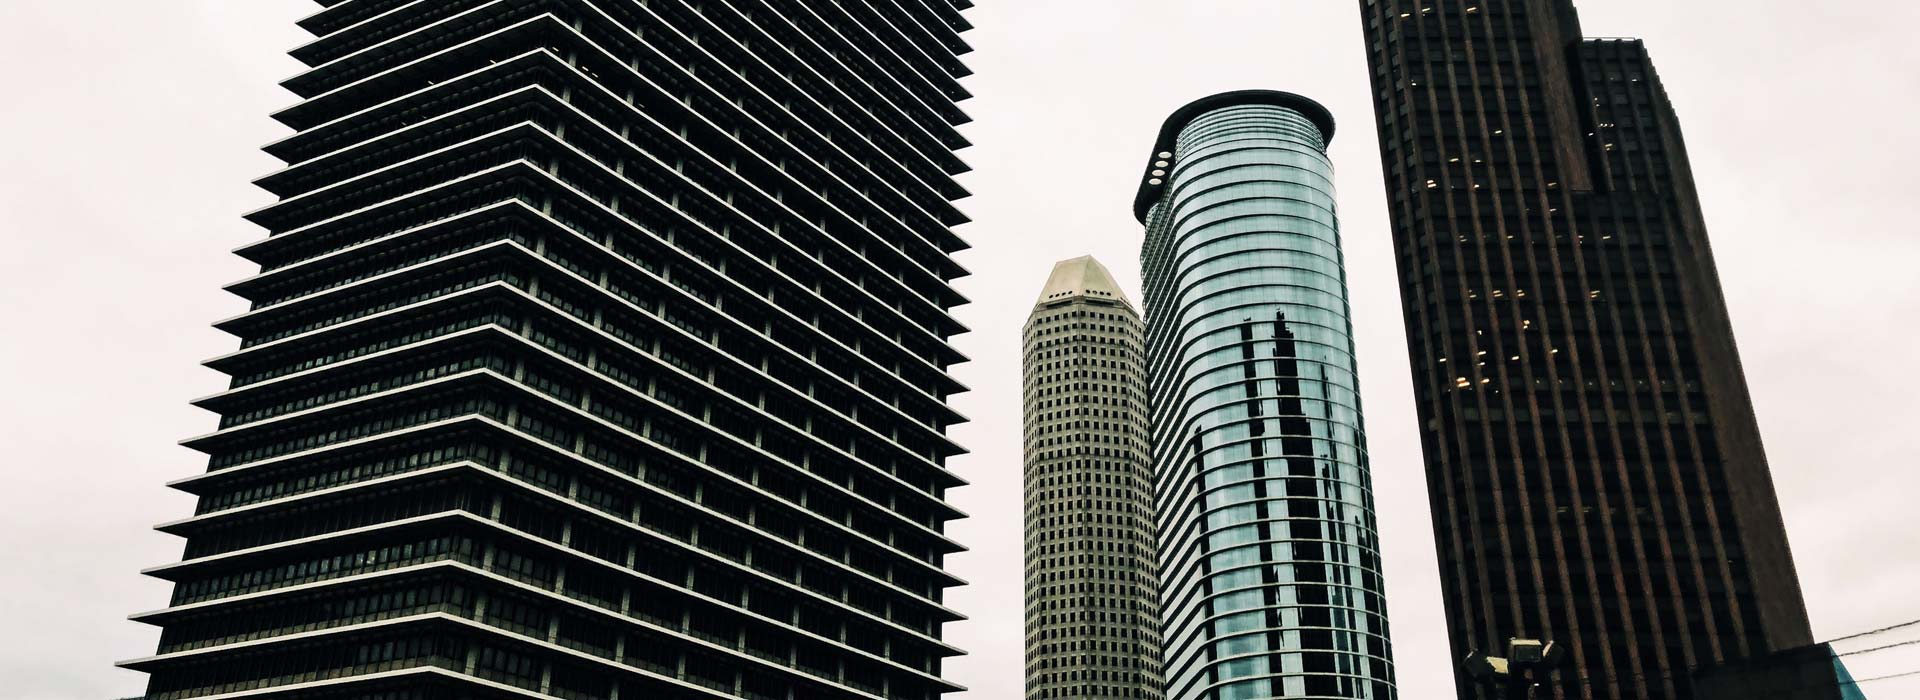 Four tall, commercial high-rise buildings stand next to each other